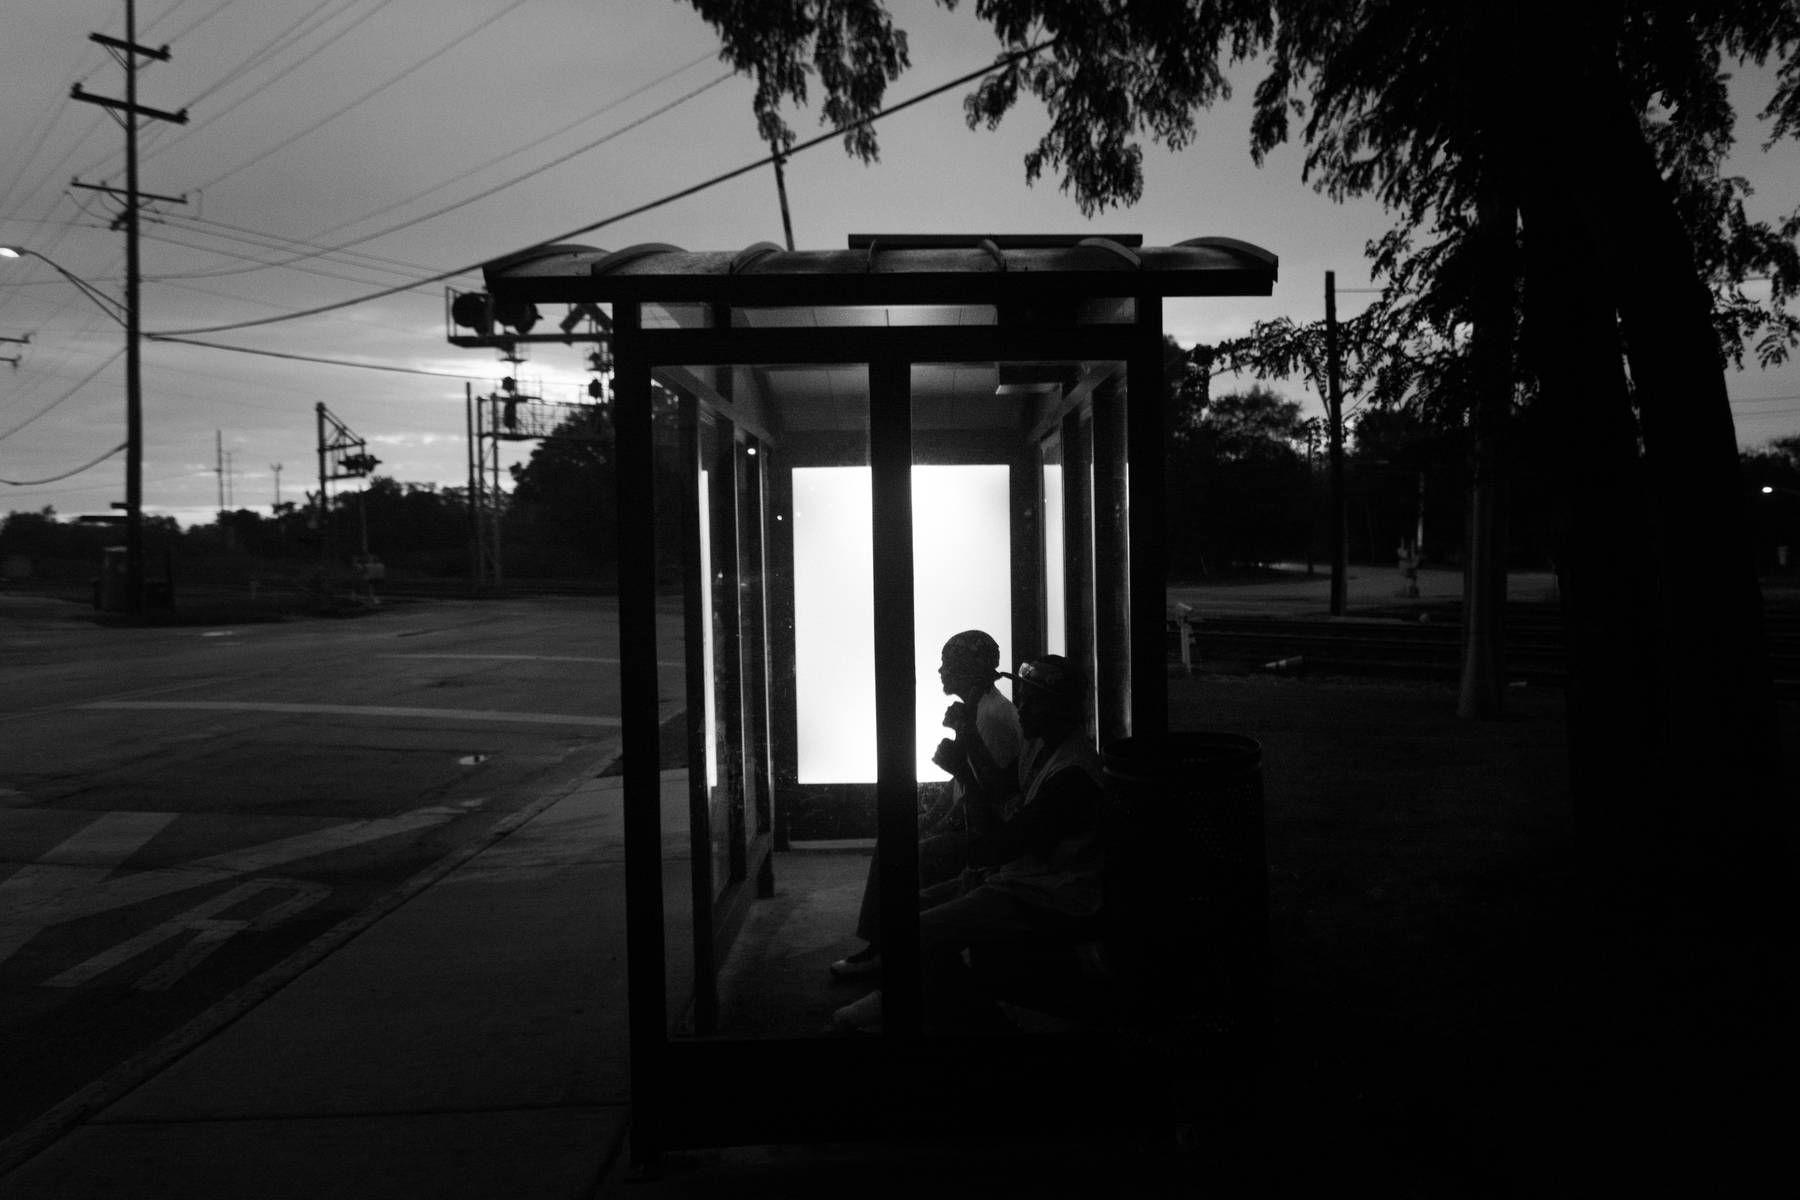 Two residents wait at a Dolton bus stop on their way to downtown Chicago. Taking public transit can be difficult in the south suburbs, with waits for Pace buses often lasting 30 to 50 minutes and commutes to the city taking more than an hour.